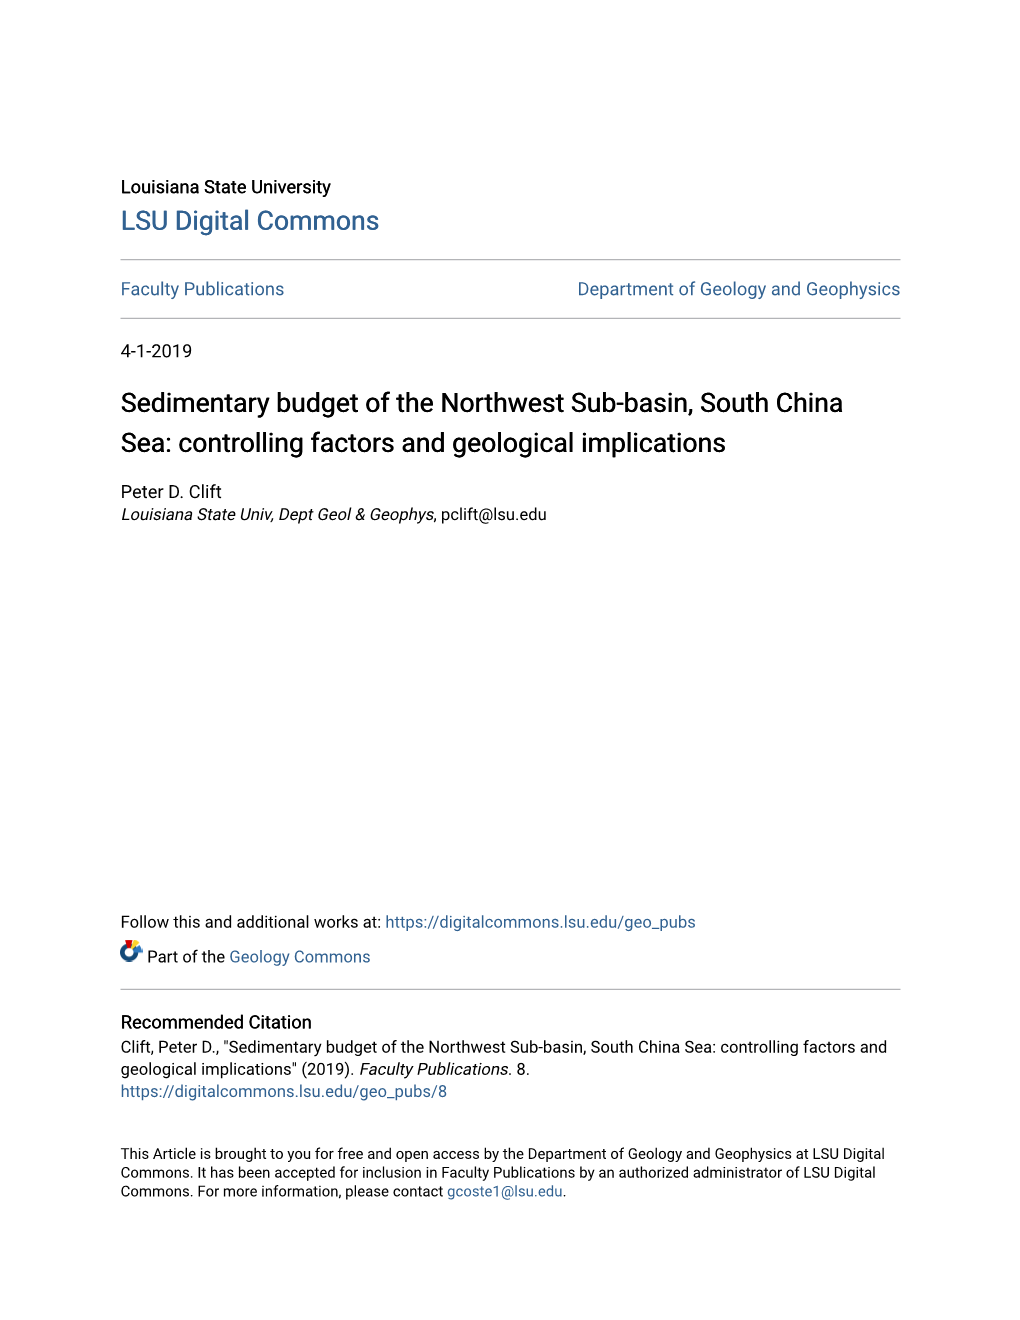 Sedimentary Budget of the Northwest Sub-Basin, South China Sea: Controlling Factors and Geological Implications